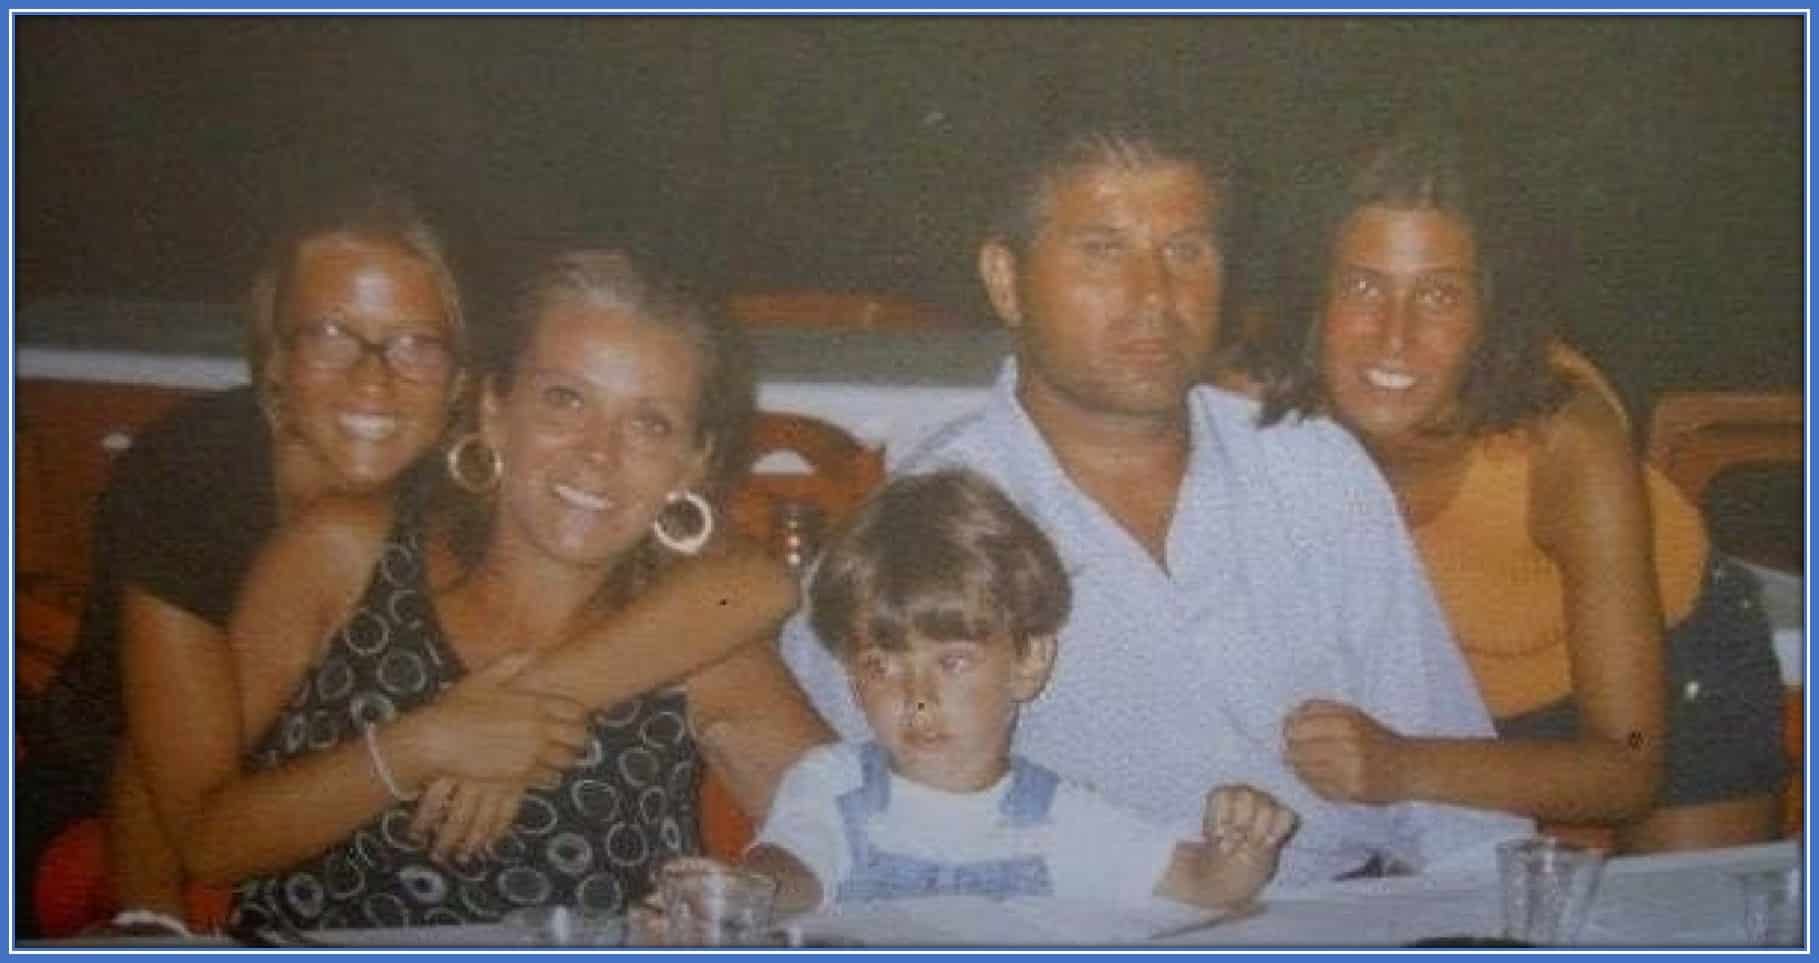 A throwback photo of little Leonardo with his father, mother, and sisters.